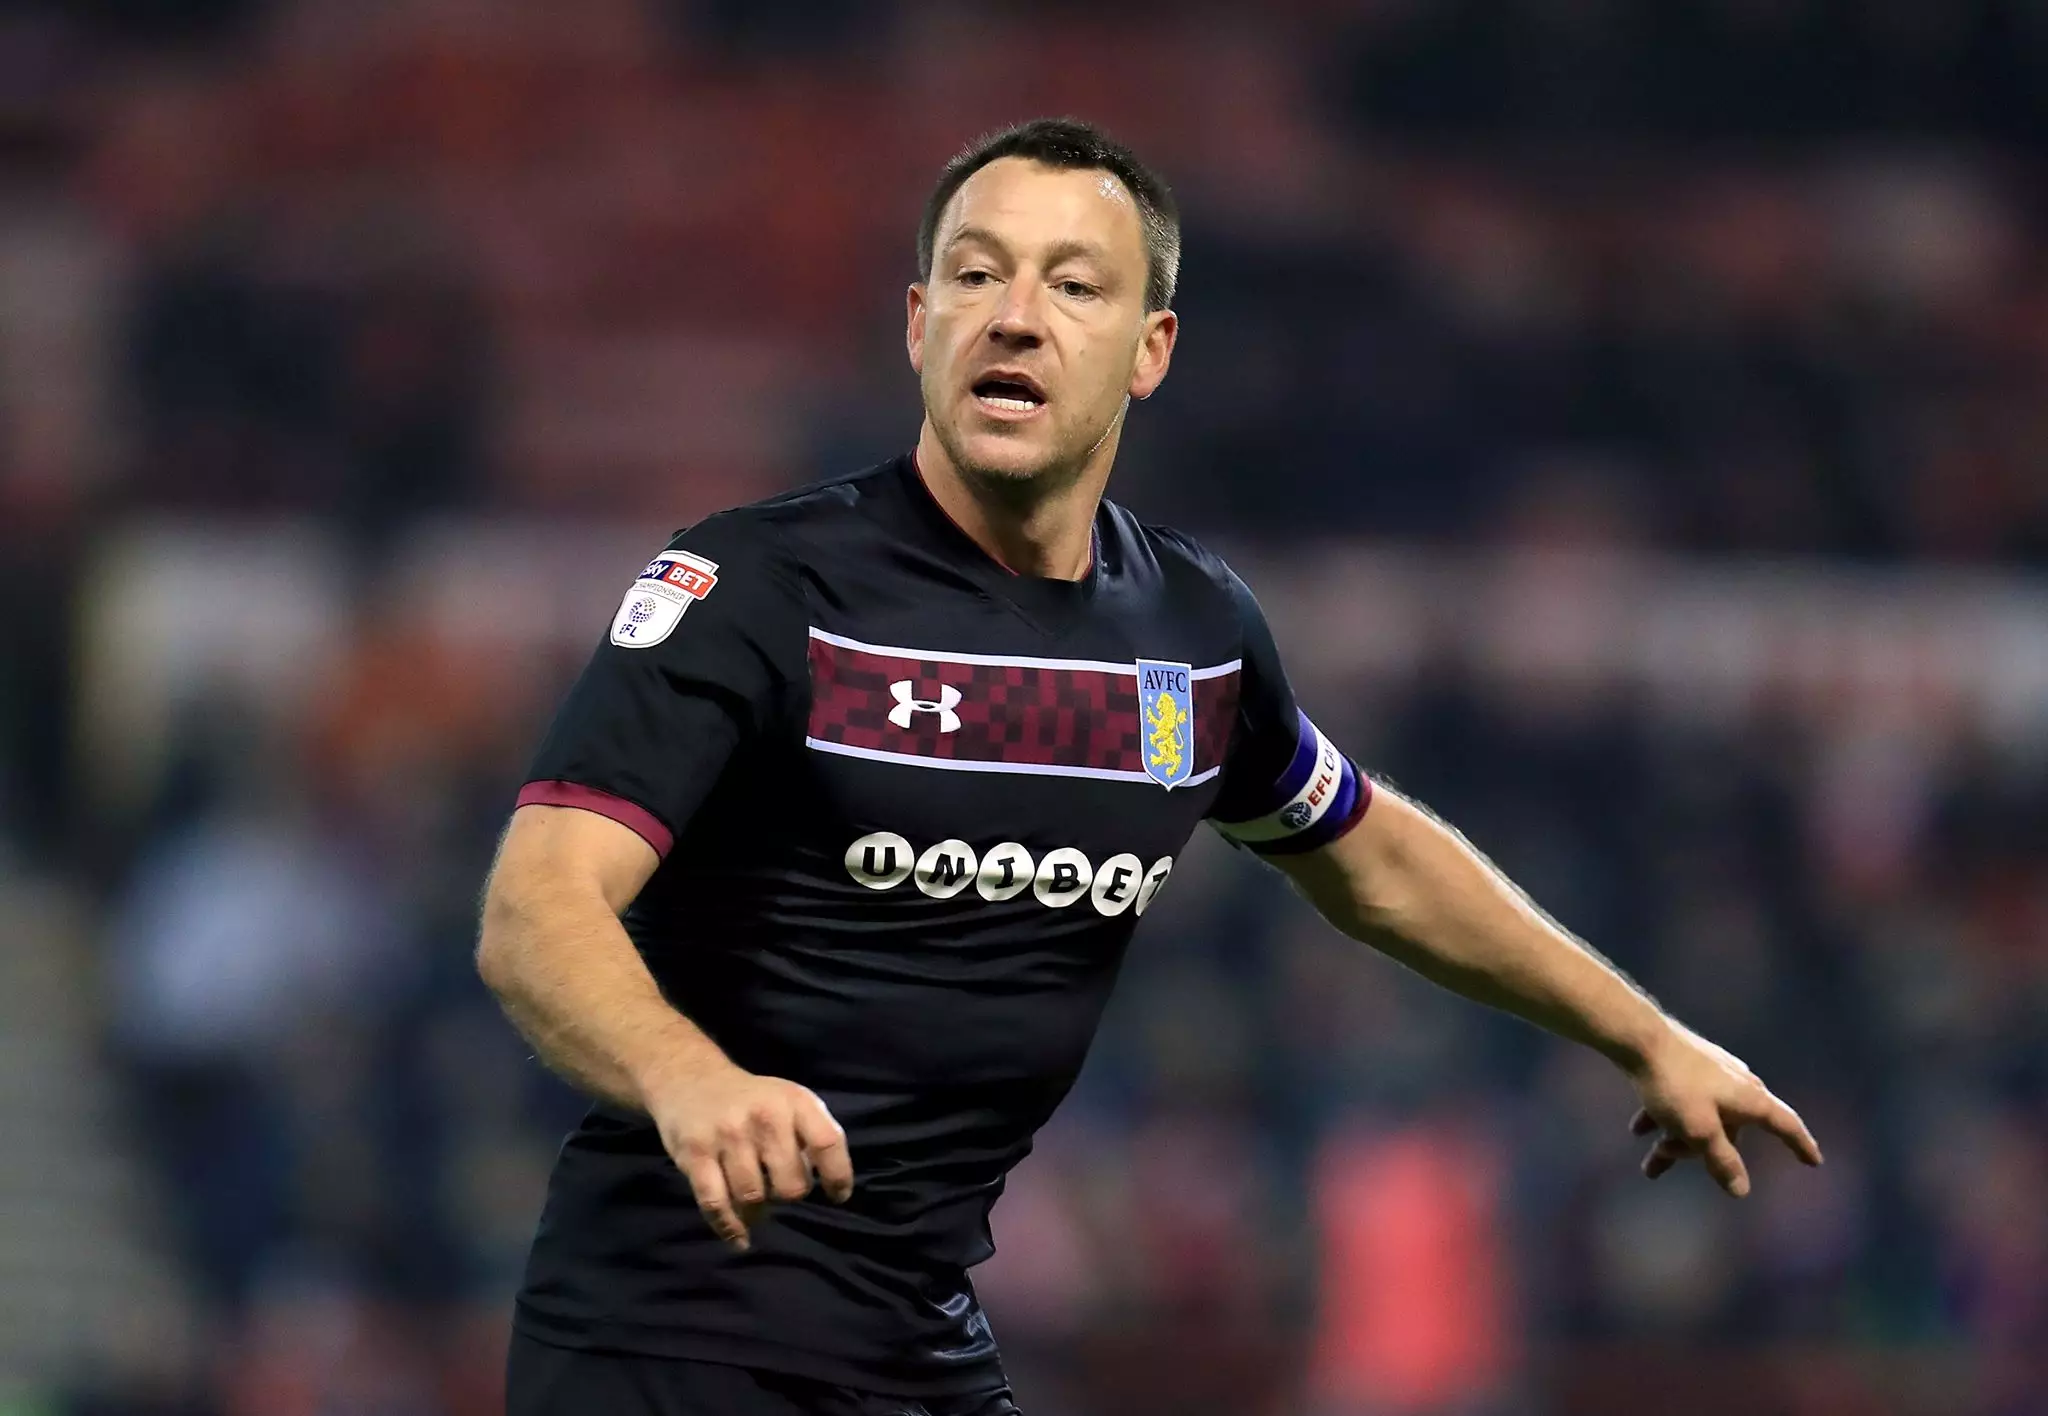 Terry has done well for Villa. Image: PA Images